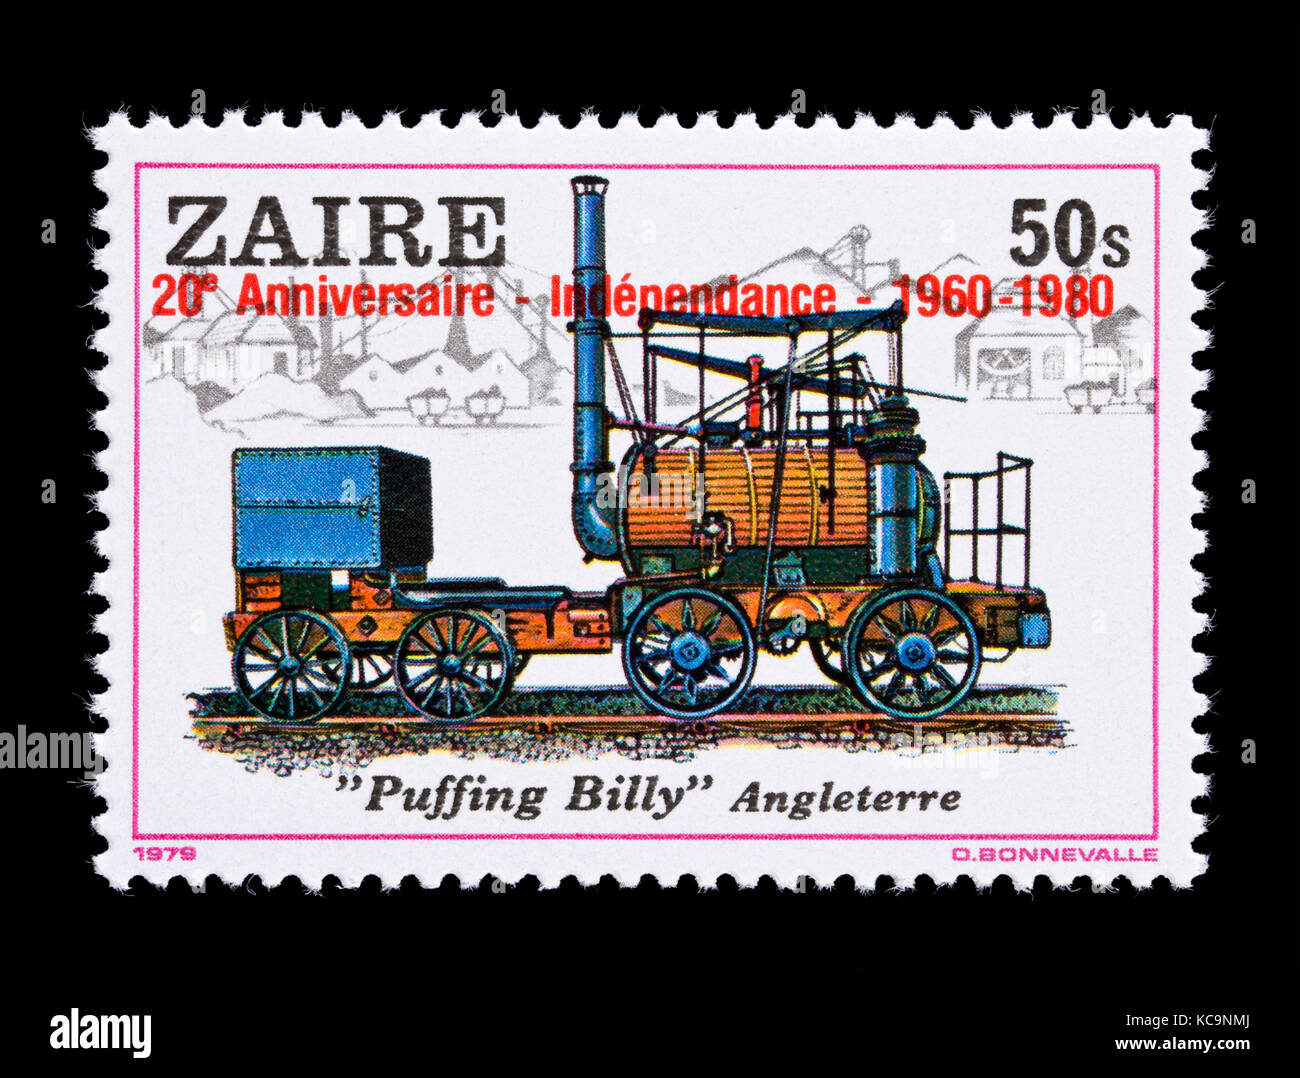 Postage stamp from Zaire depicting the early steam locomotive Puffing Billy. Stock Photo